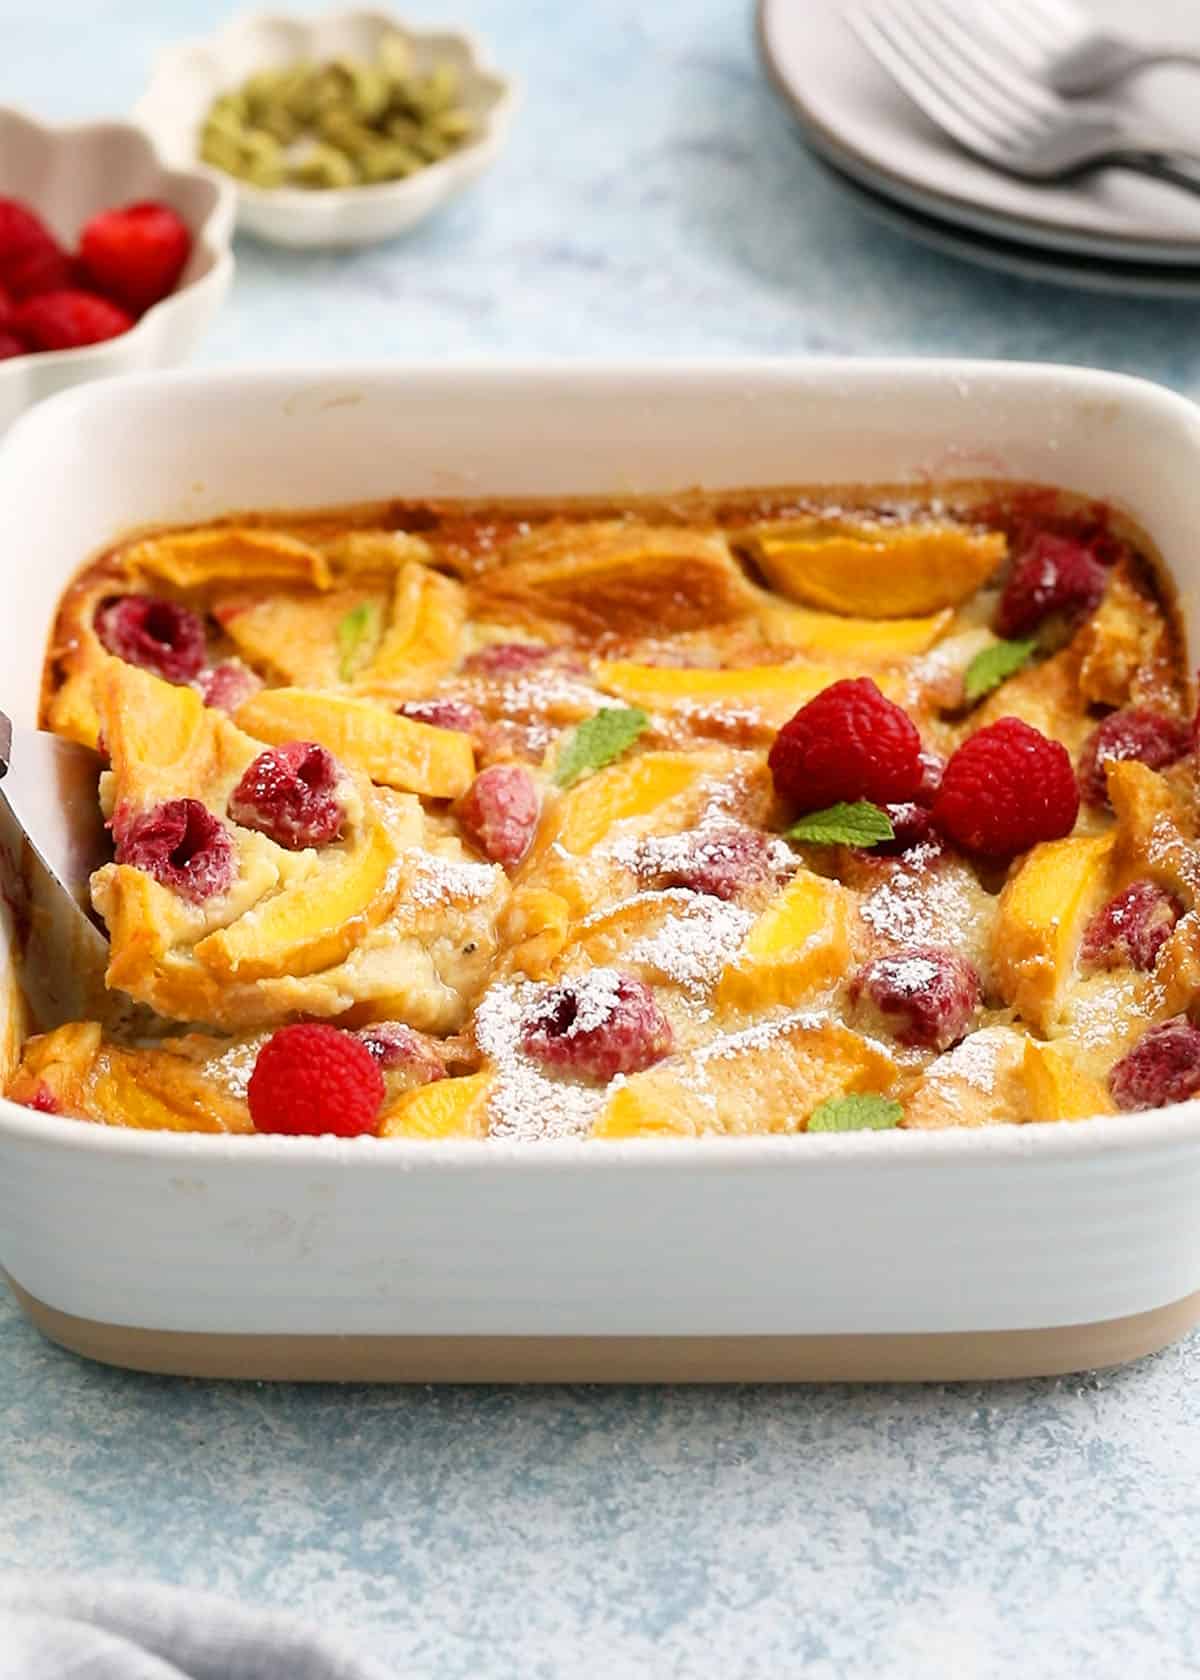 yellow clafoutis topped with red raspberries in a square baking dish.